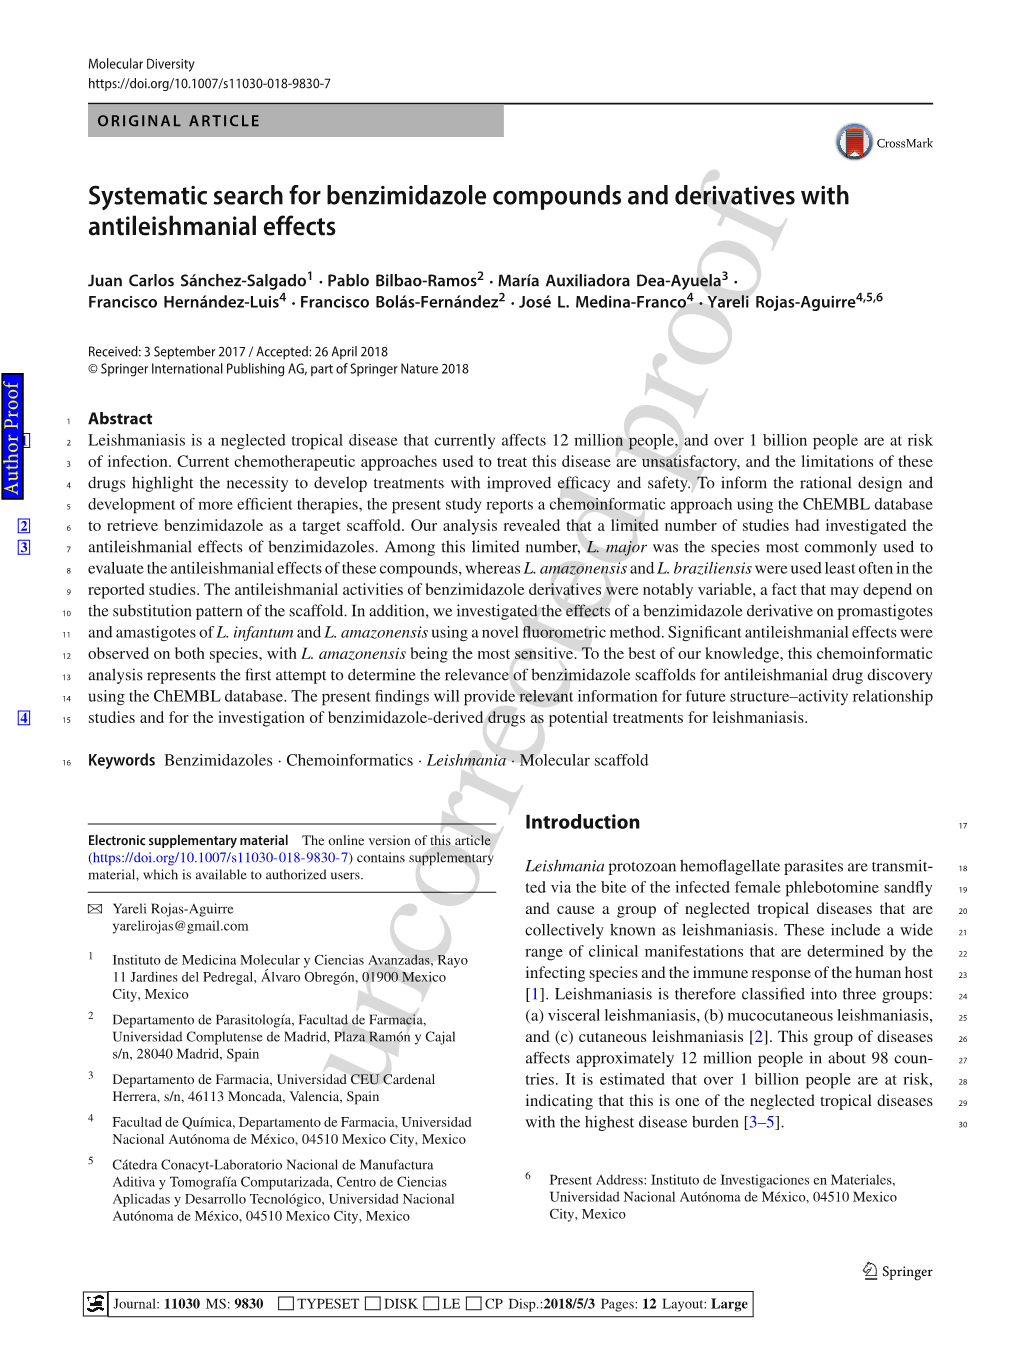 Systematic Search for Benzimidazole Compounds and Derivatives with Antileishmanial Effects